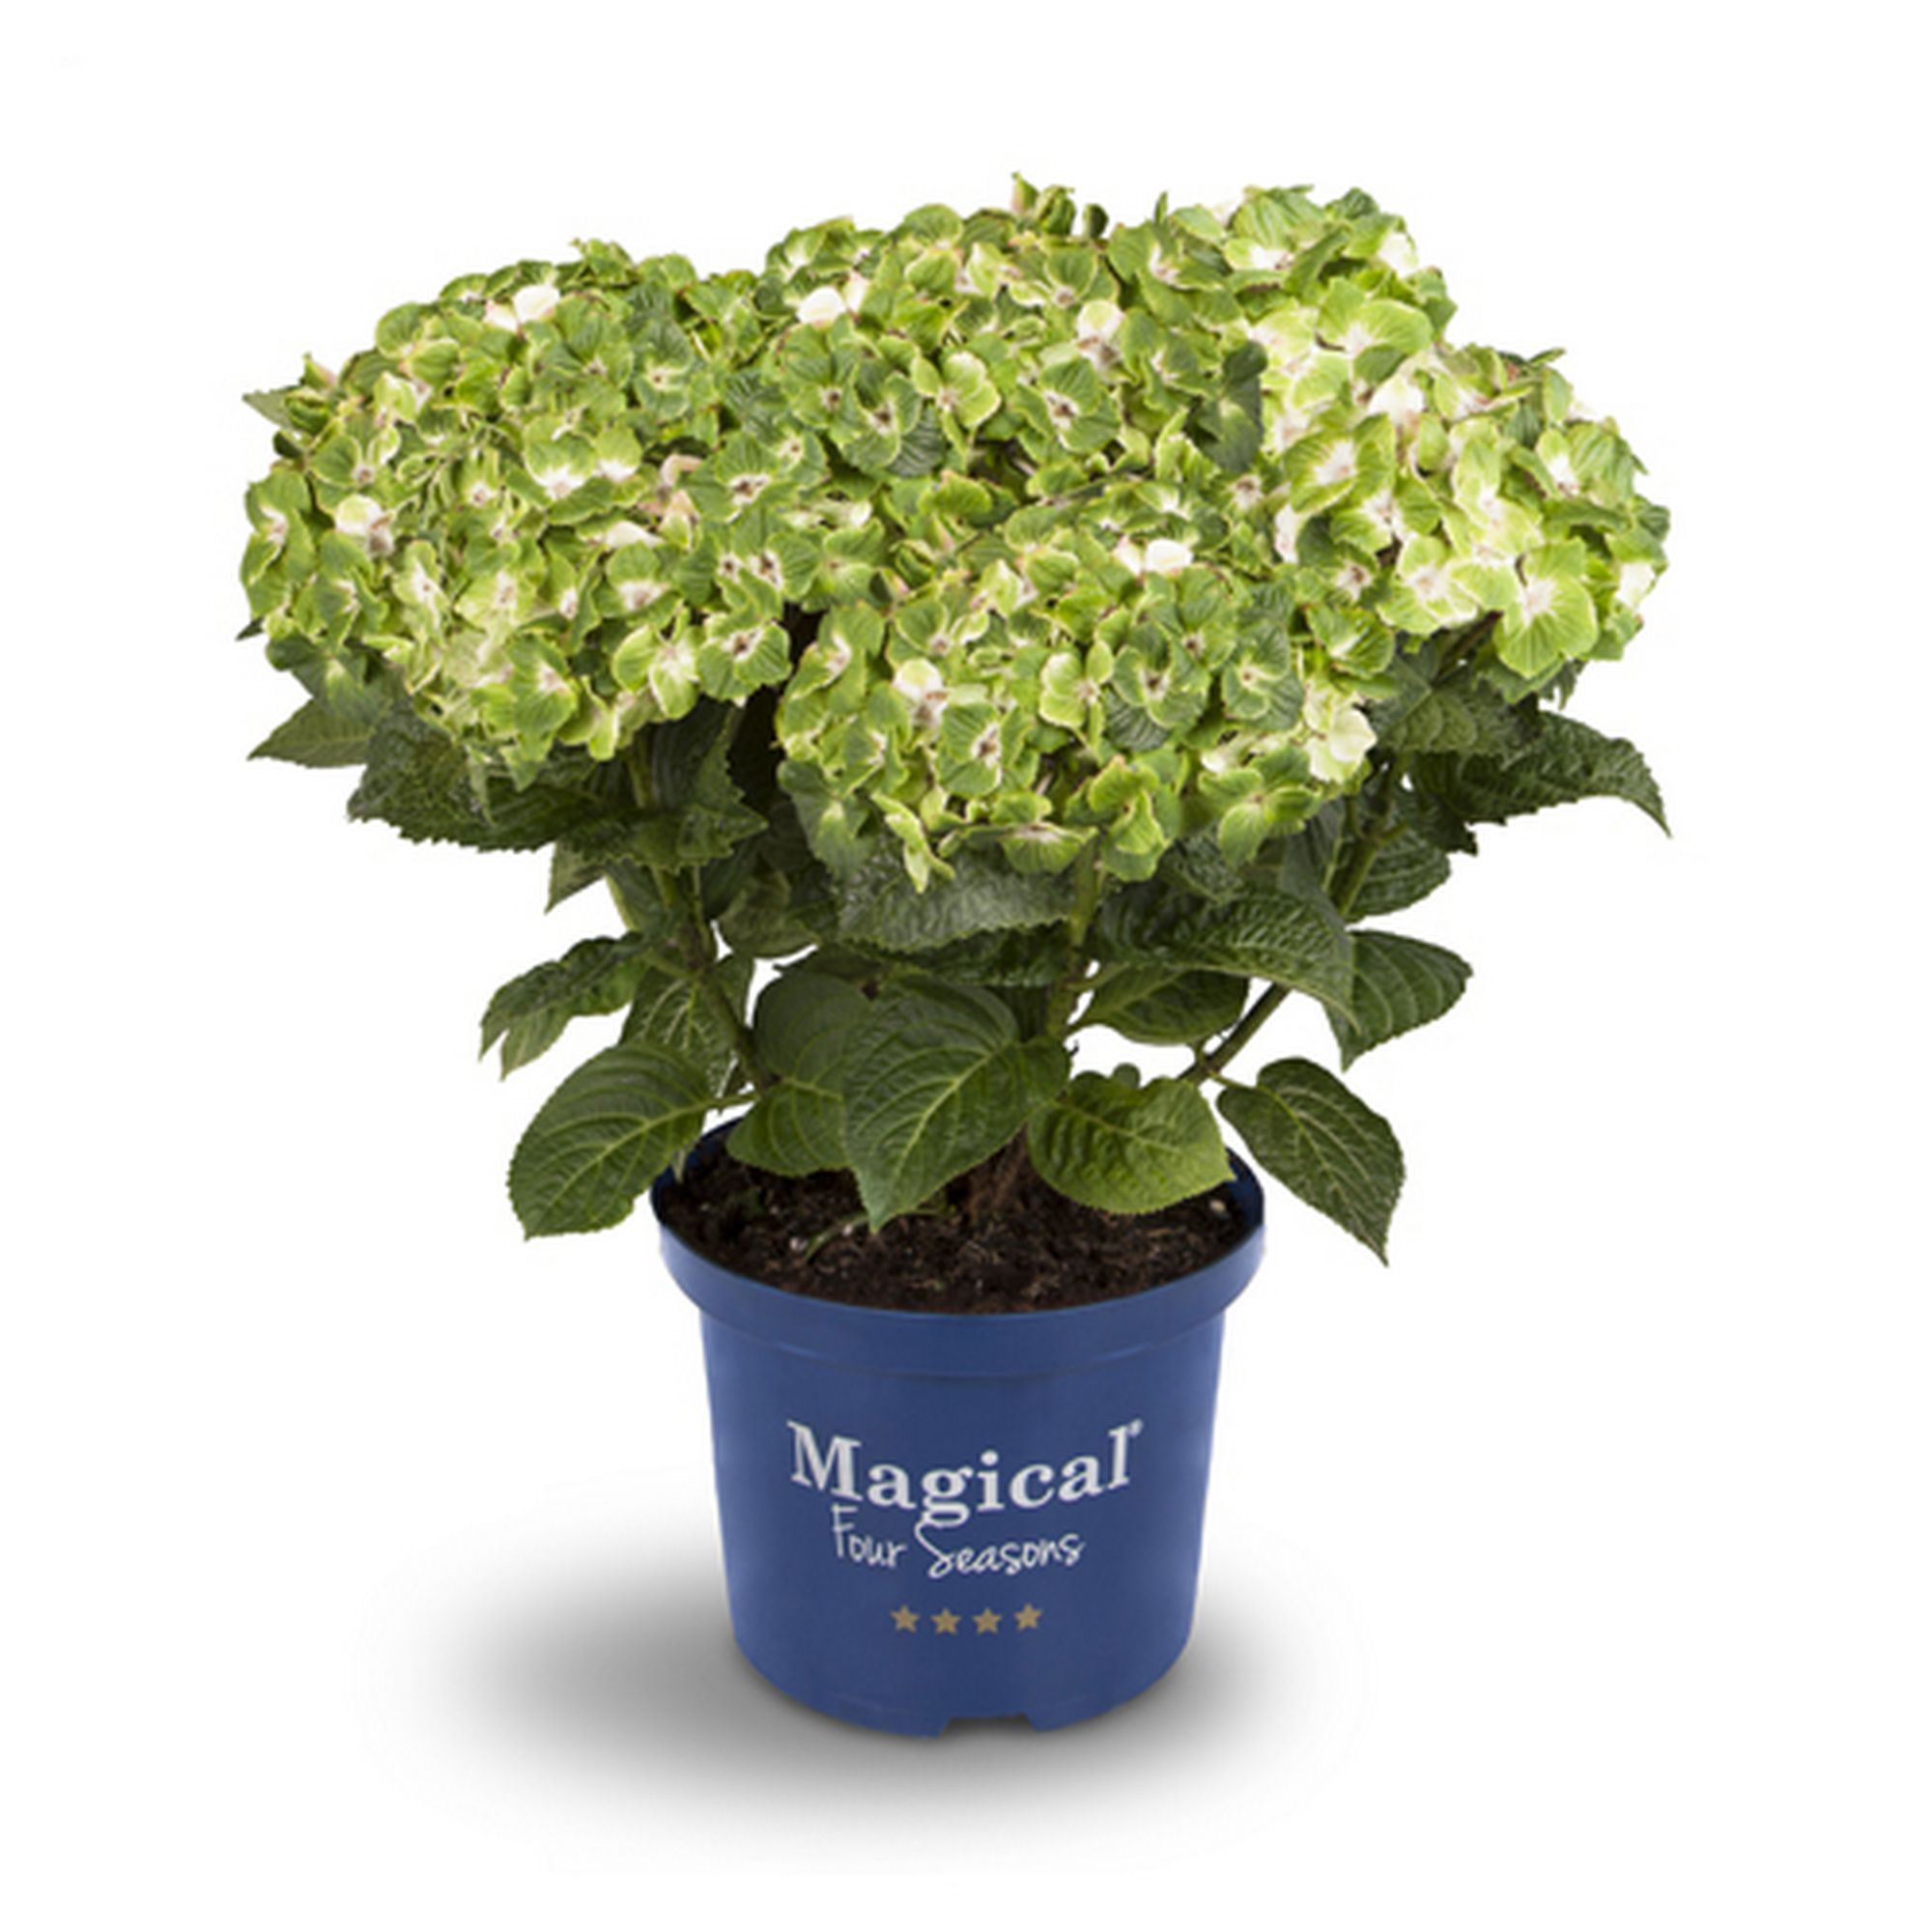 Hortensie 'Magical Noblesse®', Topf Ø 23 cm + product picture